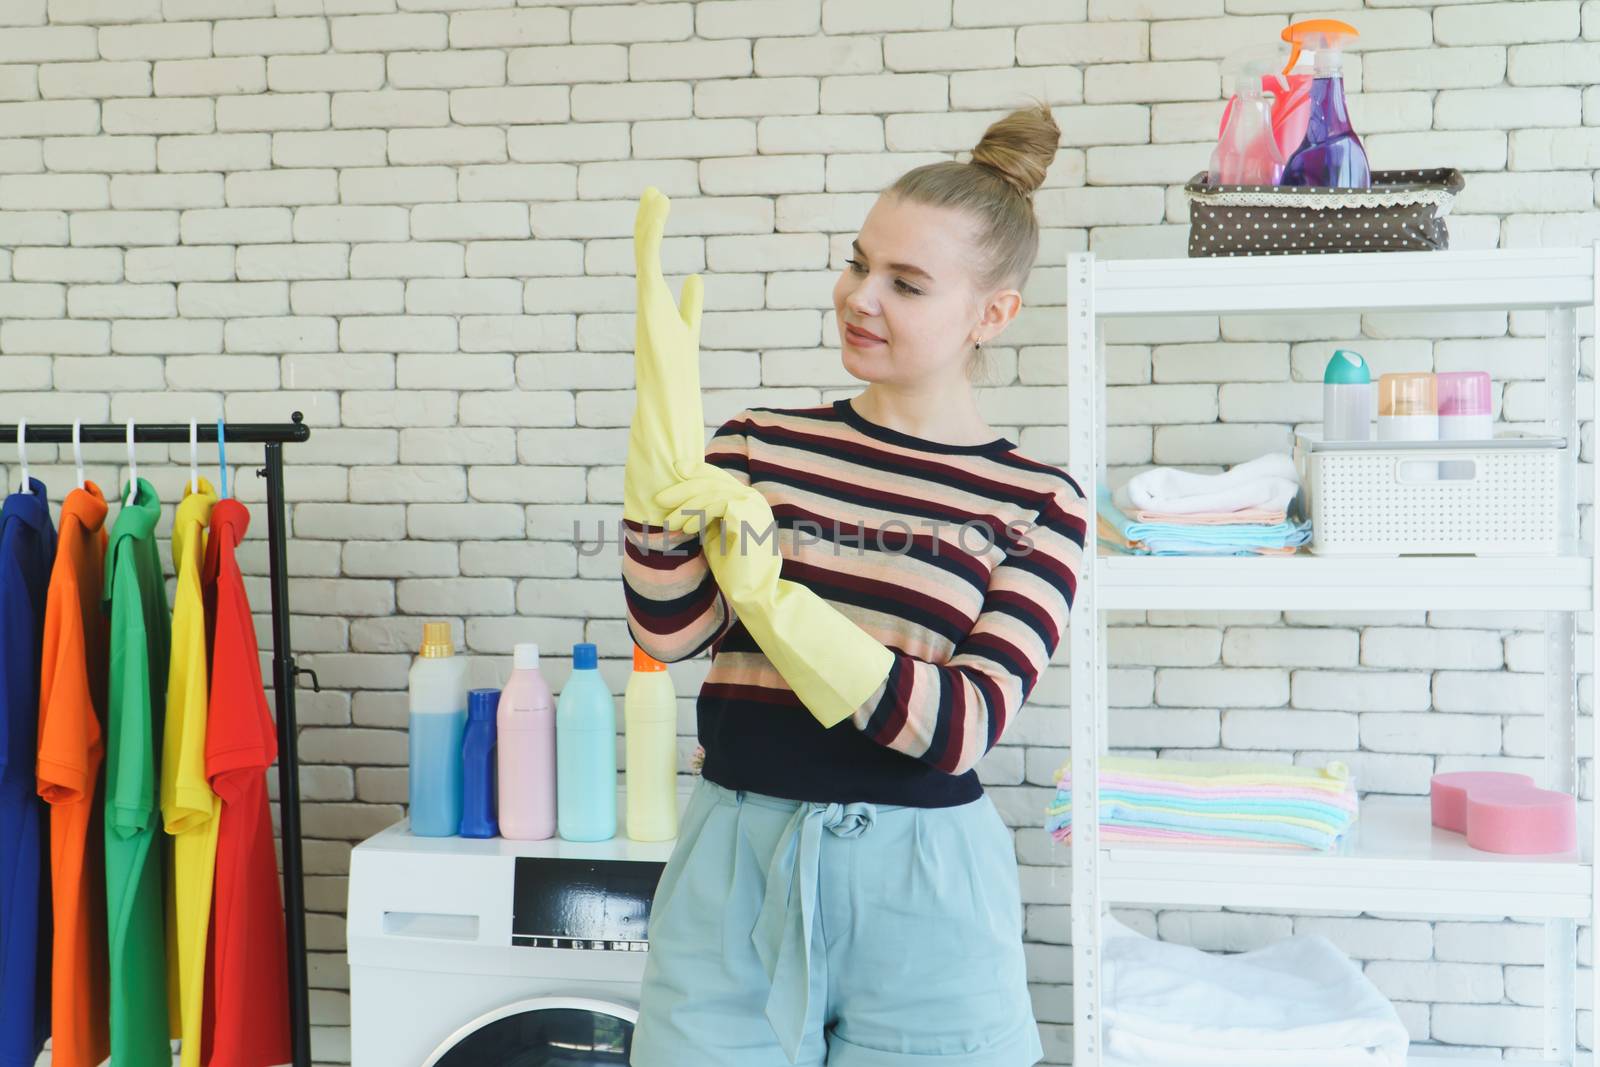 Beautiful young Caucasian women In casual wear, wearing yellow rubber gloves Prepare for laundry, clothes, and house cleaning. Attractive clean modern housekeeper, smiling and happy for the chore.